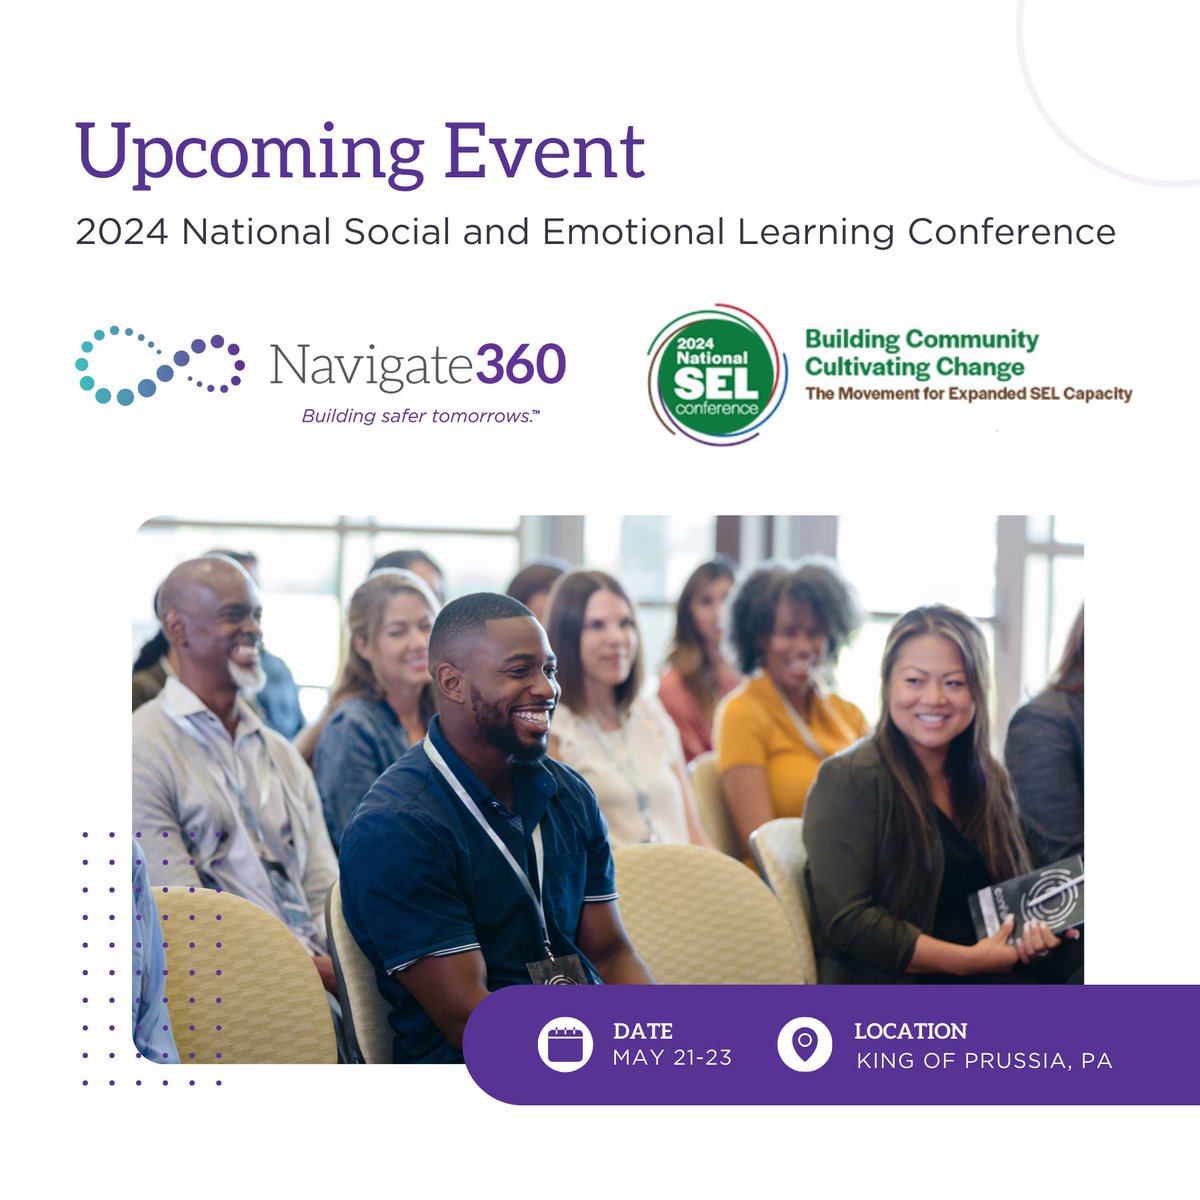 We’re excited to see you at the 2024 National Social & Emotional Learning Conference, May 21-23! Stop by our booth to see how we guide and empower our customers to reach their full potential through the creation of safe, engaging, & supportive environments. #NSELConference